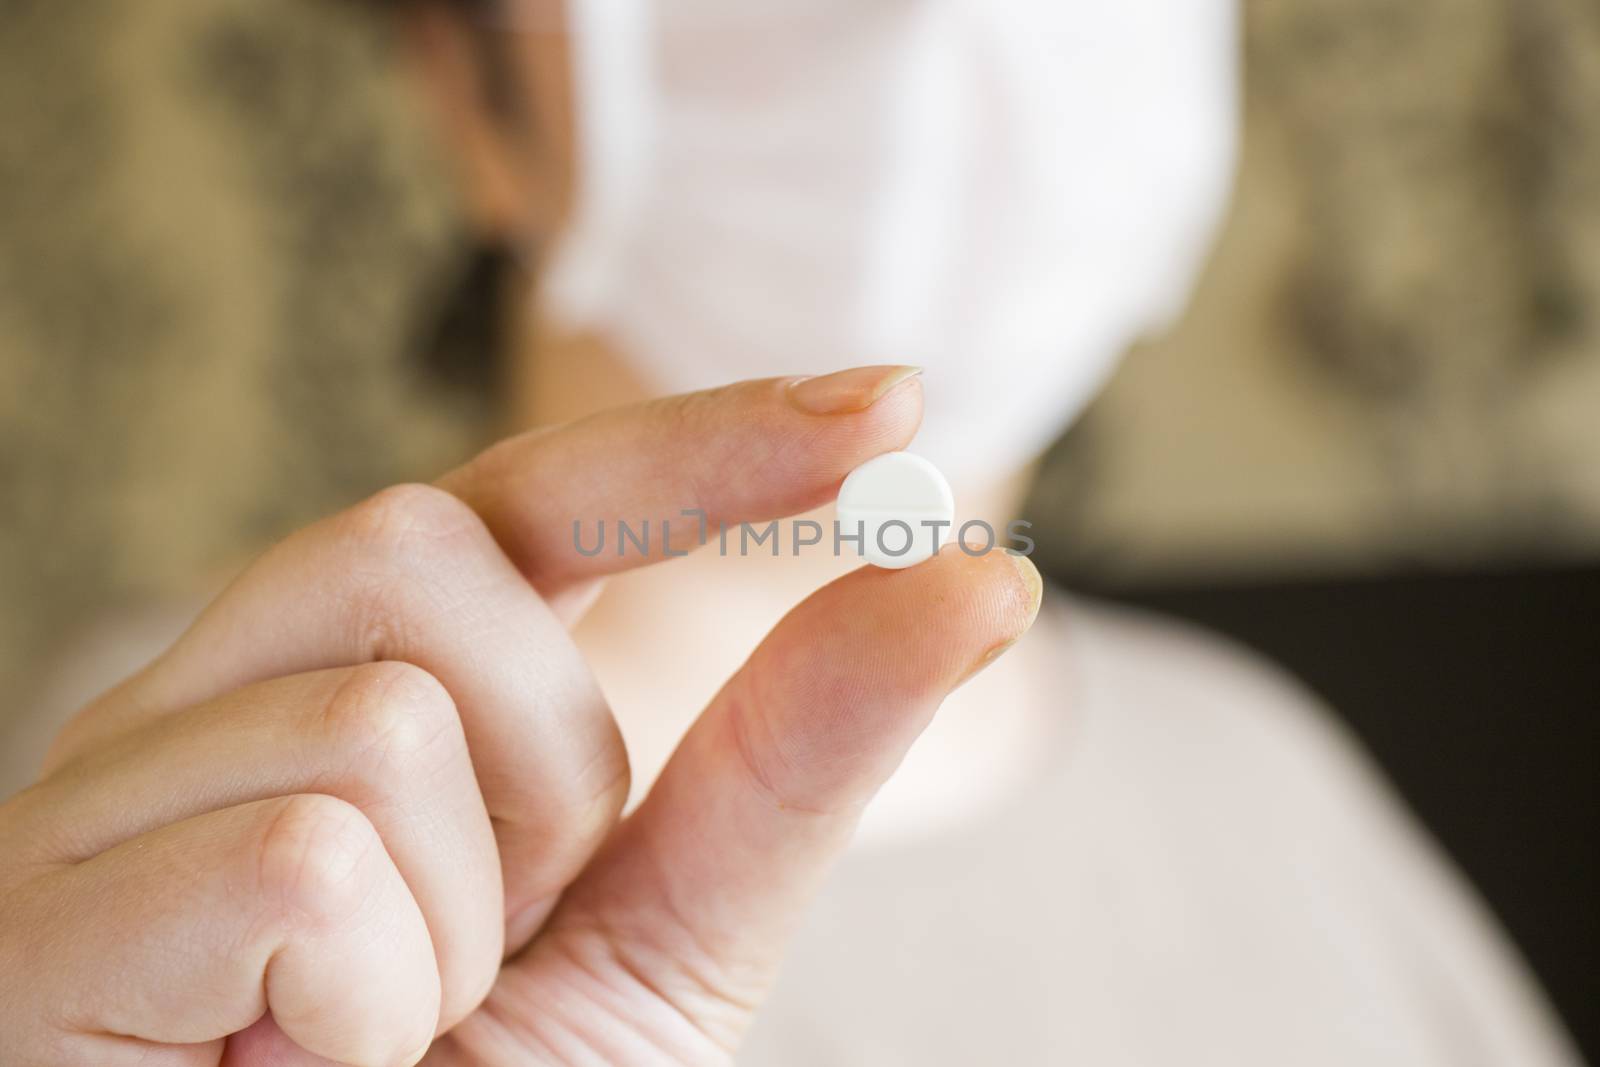 Drugs and pills, medicine and healthy care. Woman holding white pill in hand on the blur face background.